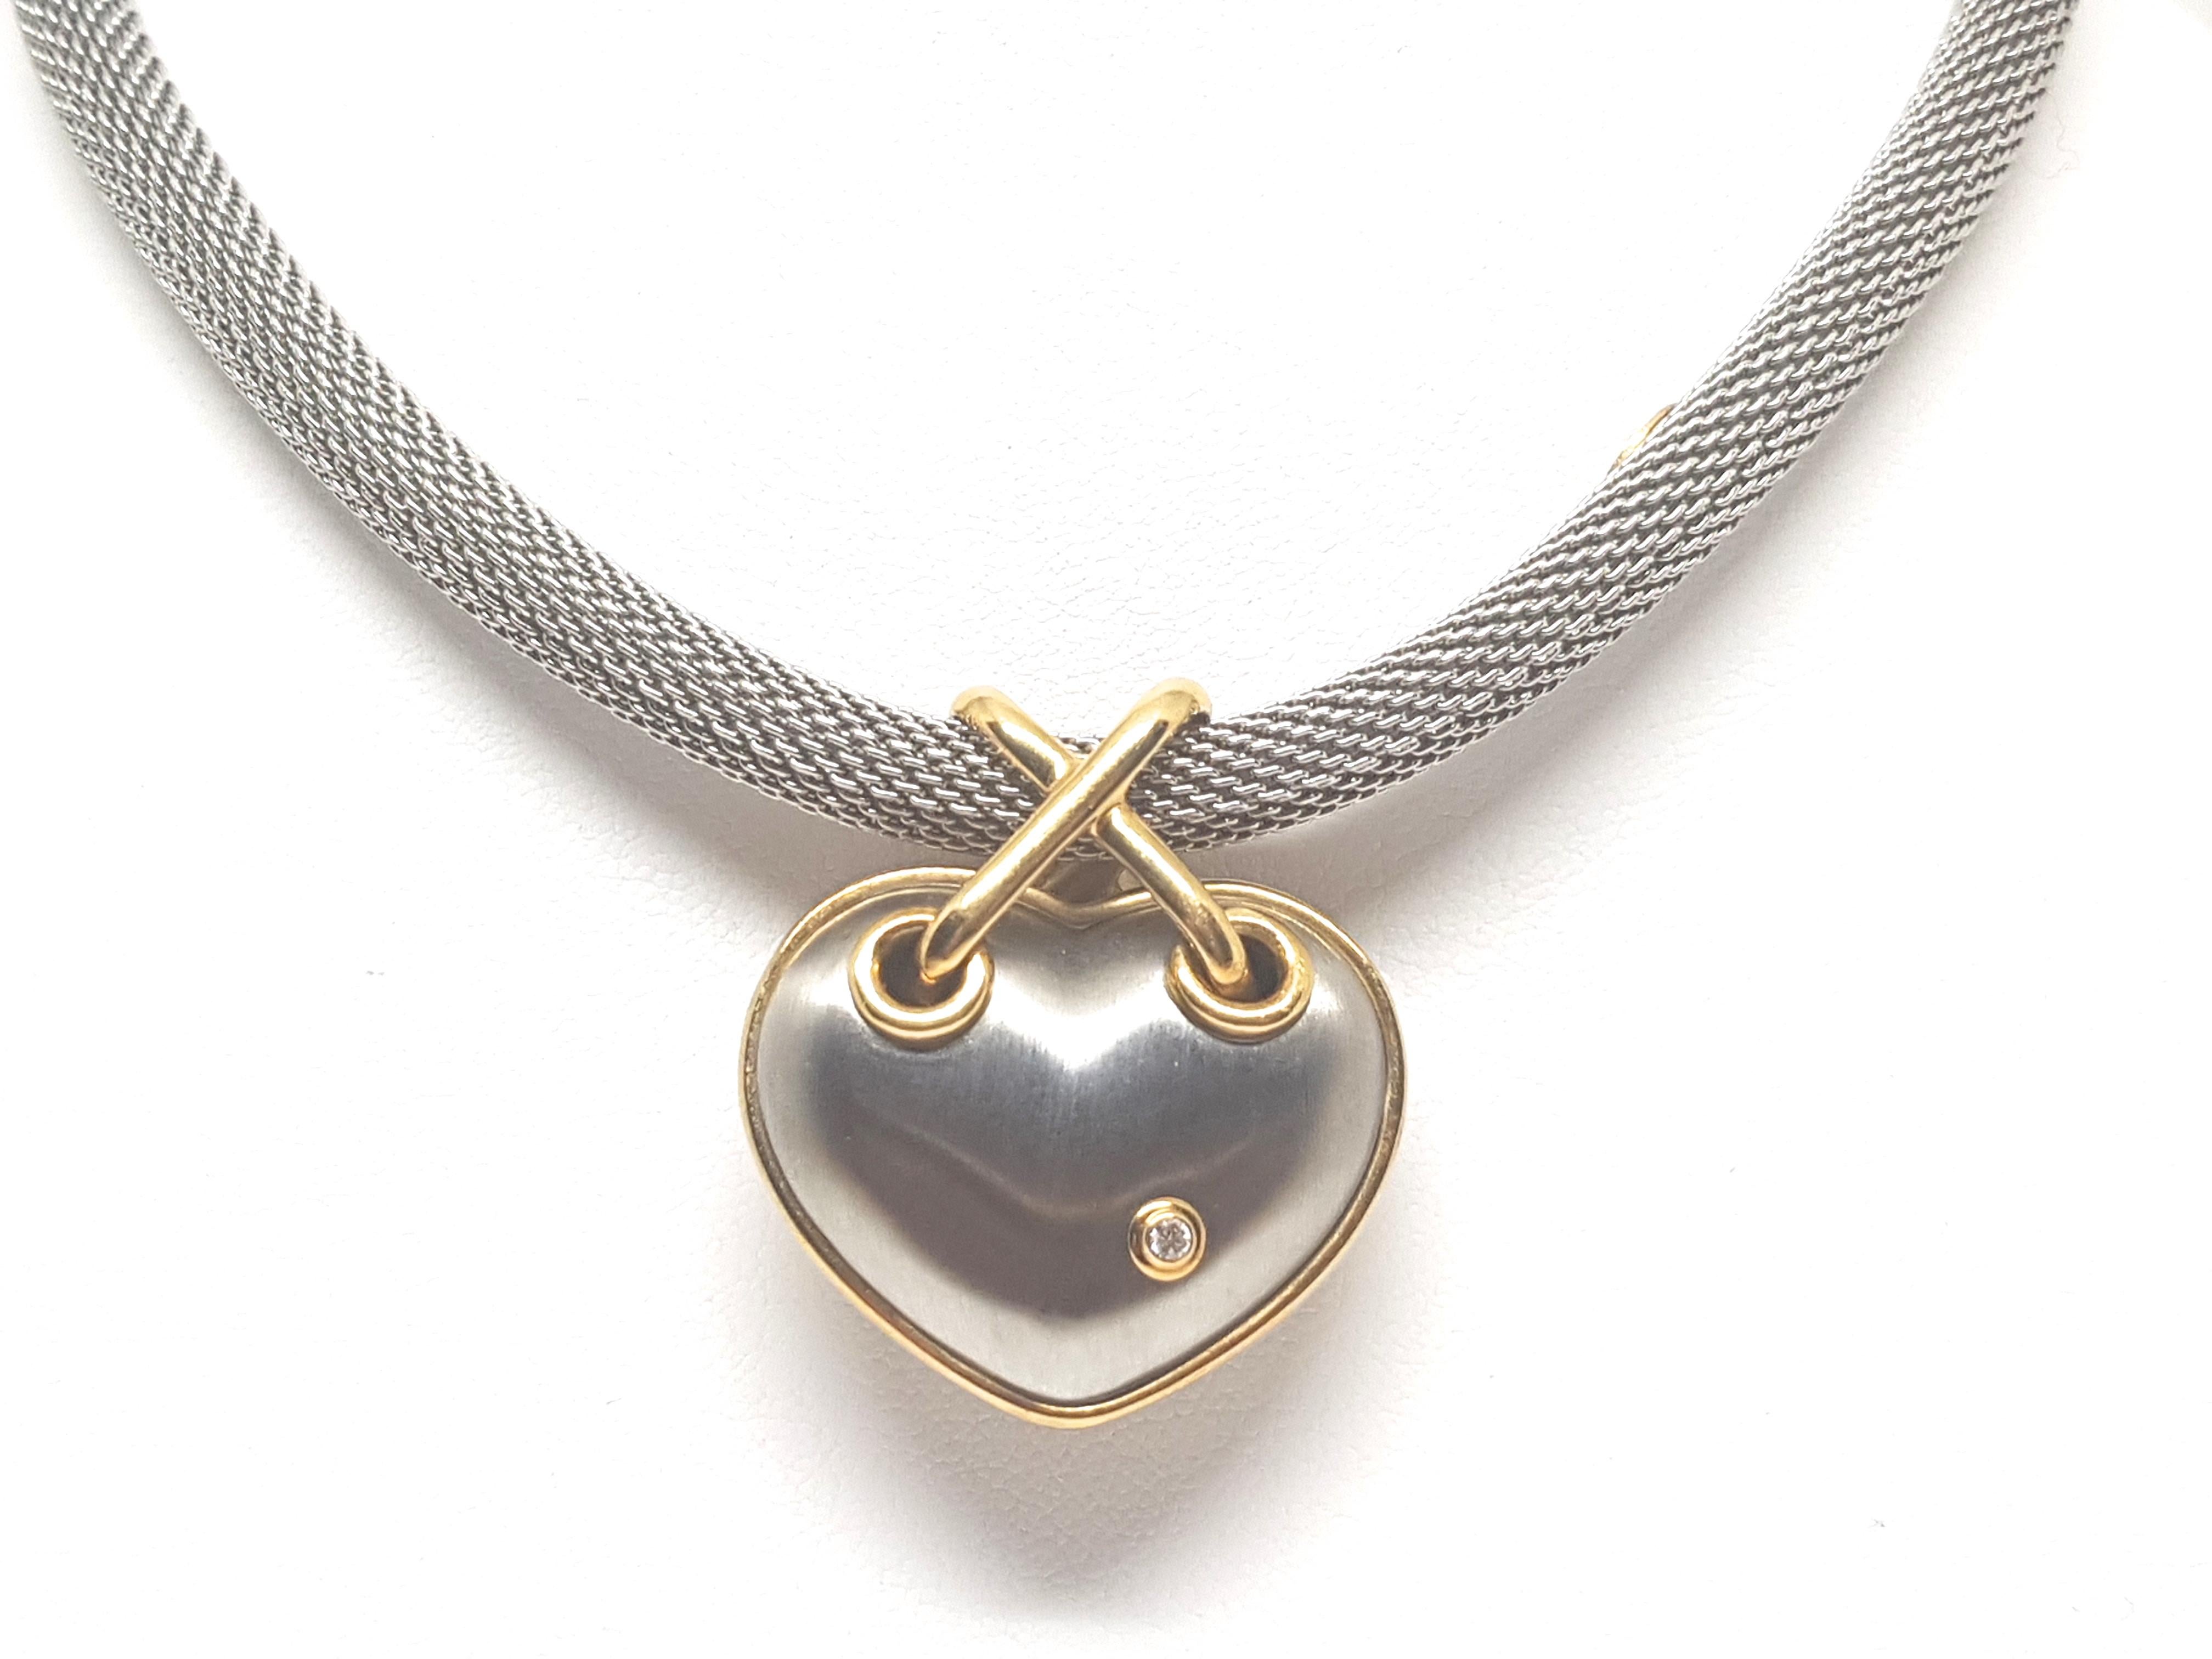 Signed Darsy 750 
Gold: 18 Carat Yellow Gold / Stainless Steel 
Necklace and Pendant made out of Stainless steel and gold accents in 18K Gold 
Weight: 50.44 gr. 
Diamond: 0.07ct. D / IF 
Length Necklace: 45.0cm. 
Width Necklace: 0.6 cm. 
All our